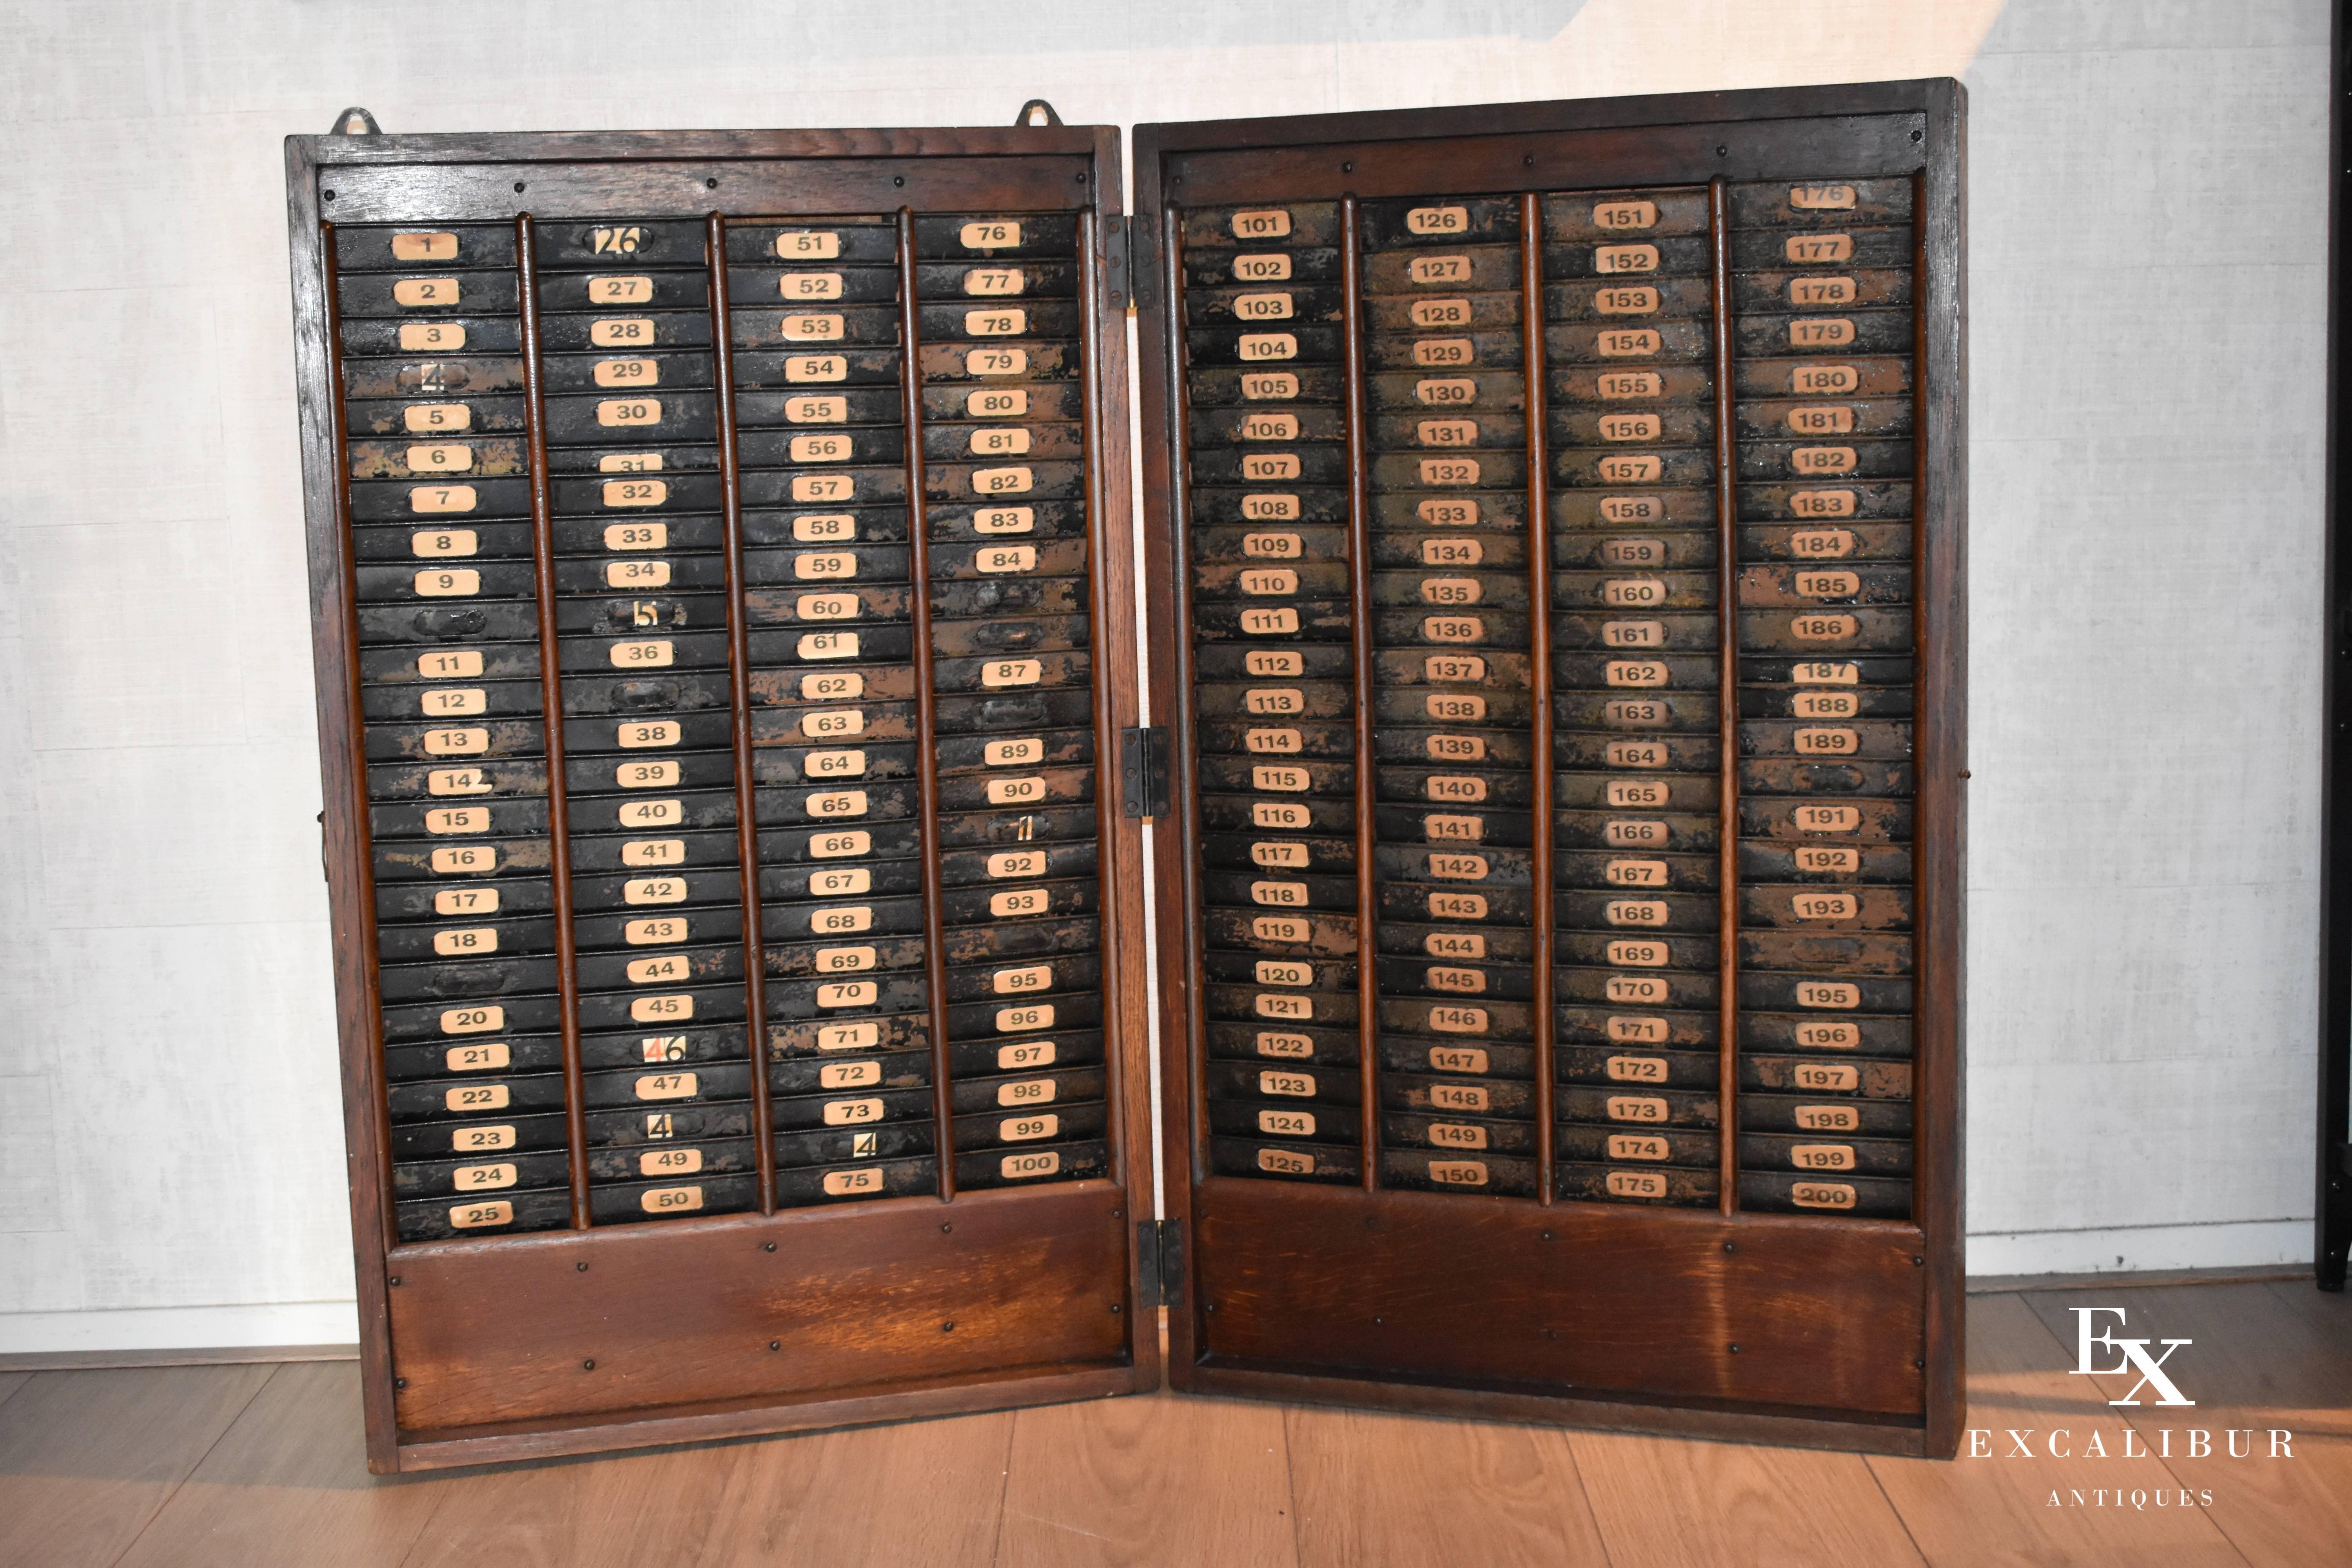 Antique industrial factory worker time card rack

This impressive time card rack was used by workers of a factory to store their punching cards in the early 1900s. Each factory worker had his own card and corresponding number which registrated the